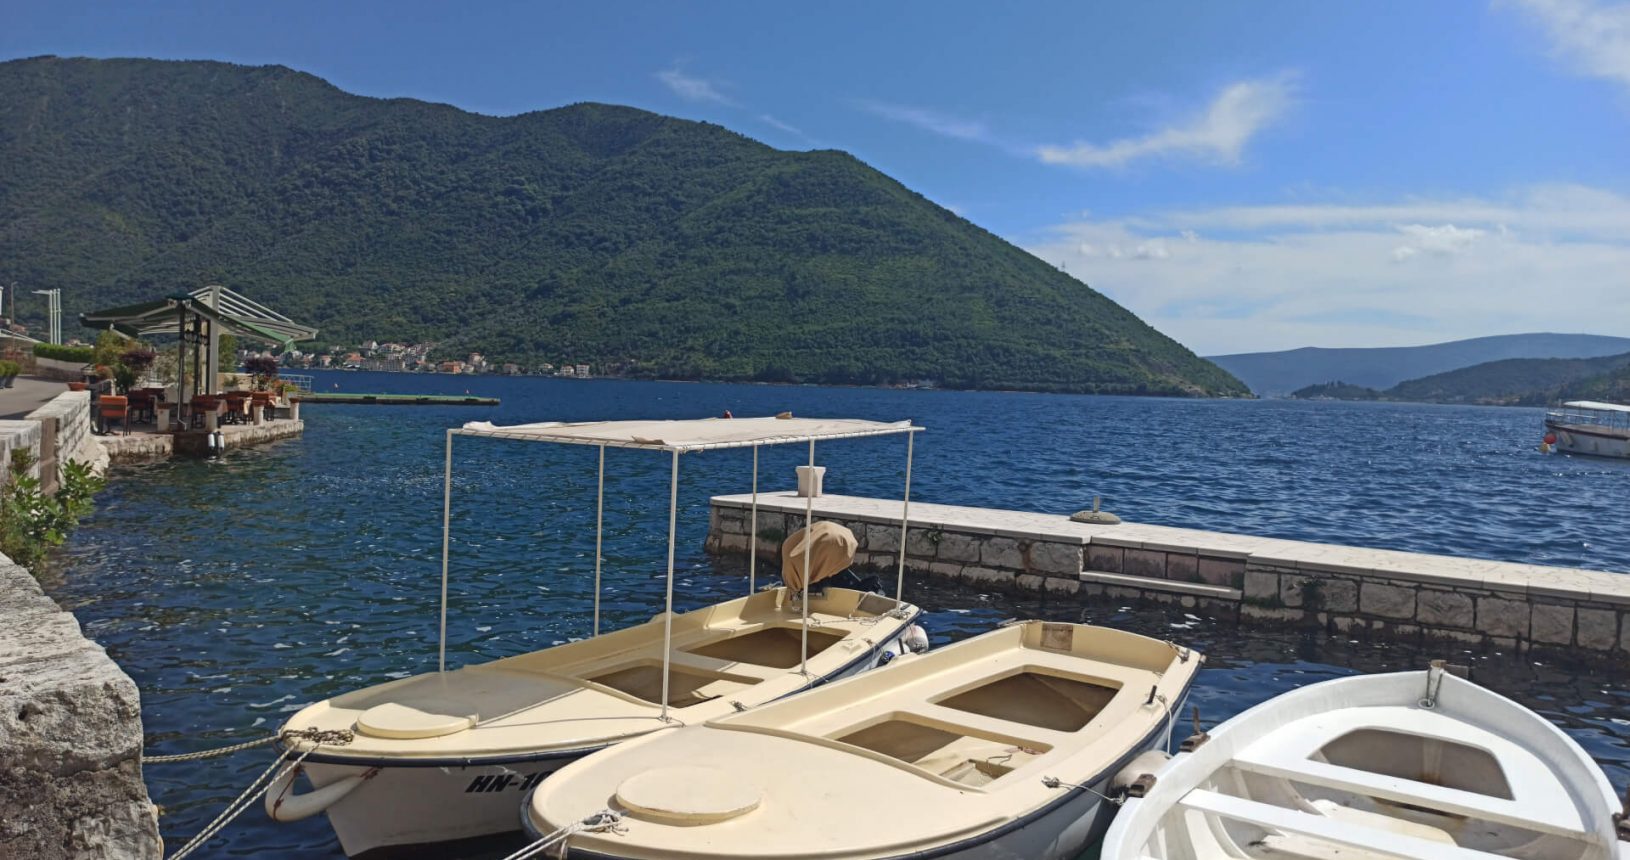 Boats in Perast